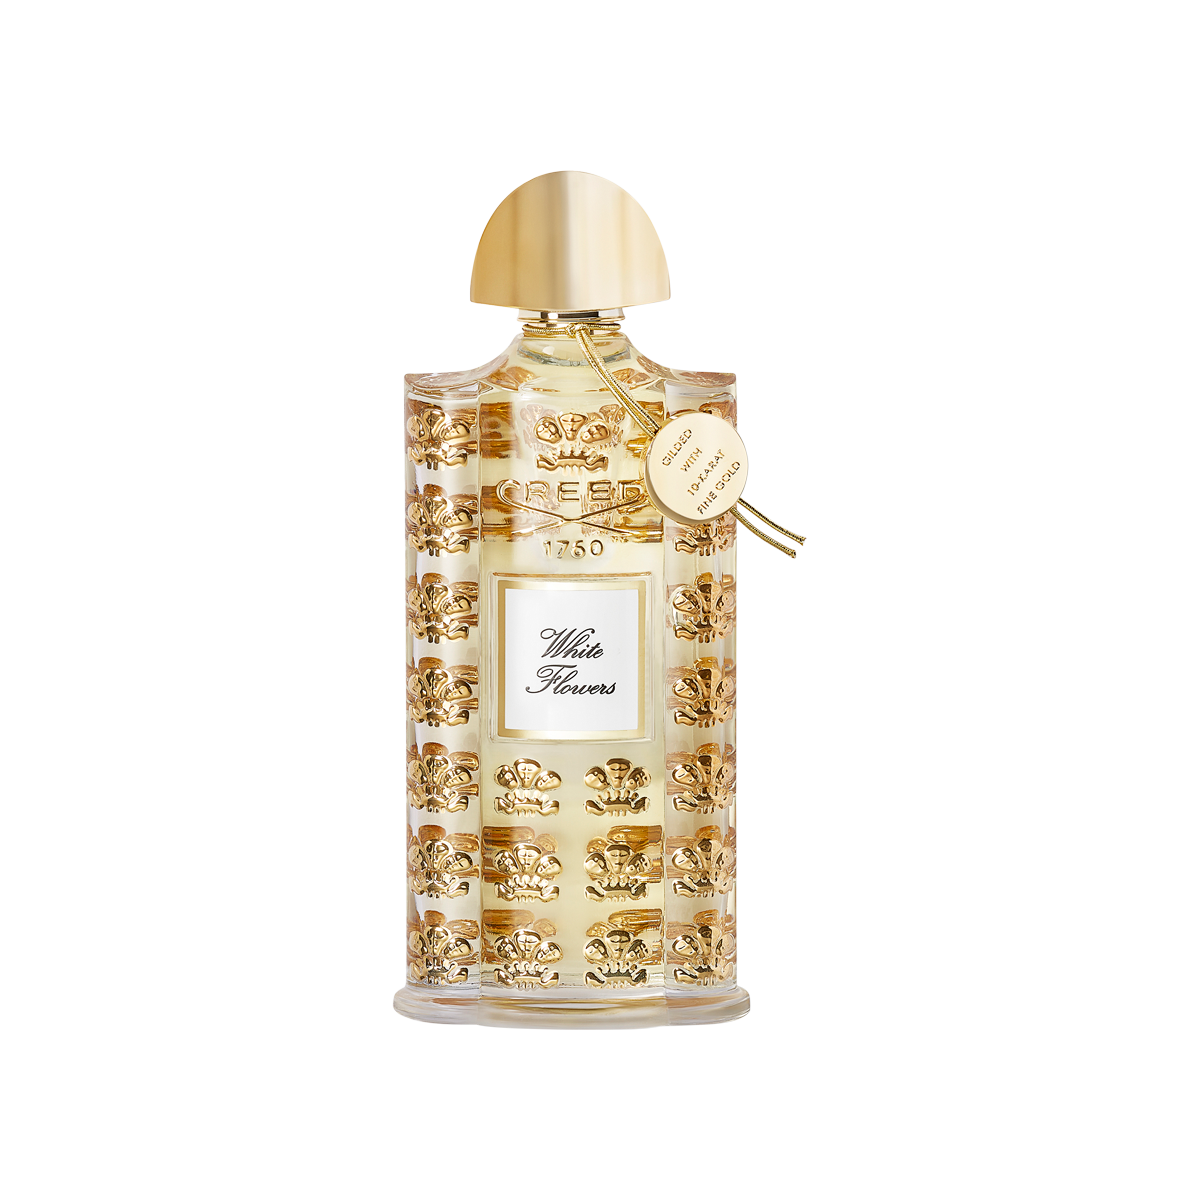 Creed - Royal Exclusives White Flowers EDP